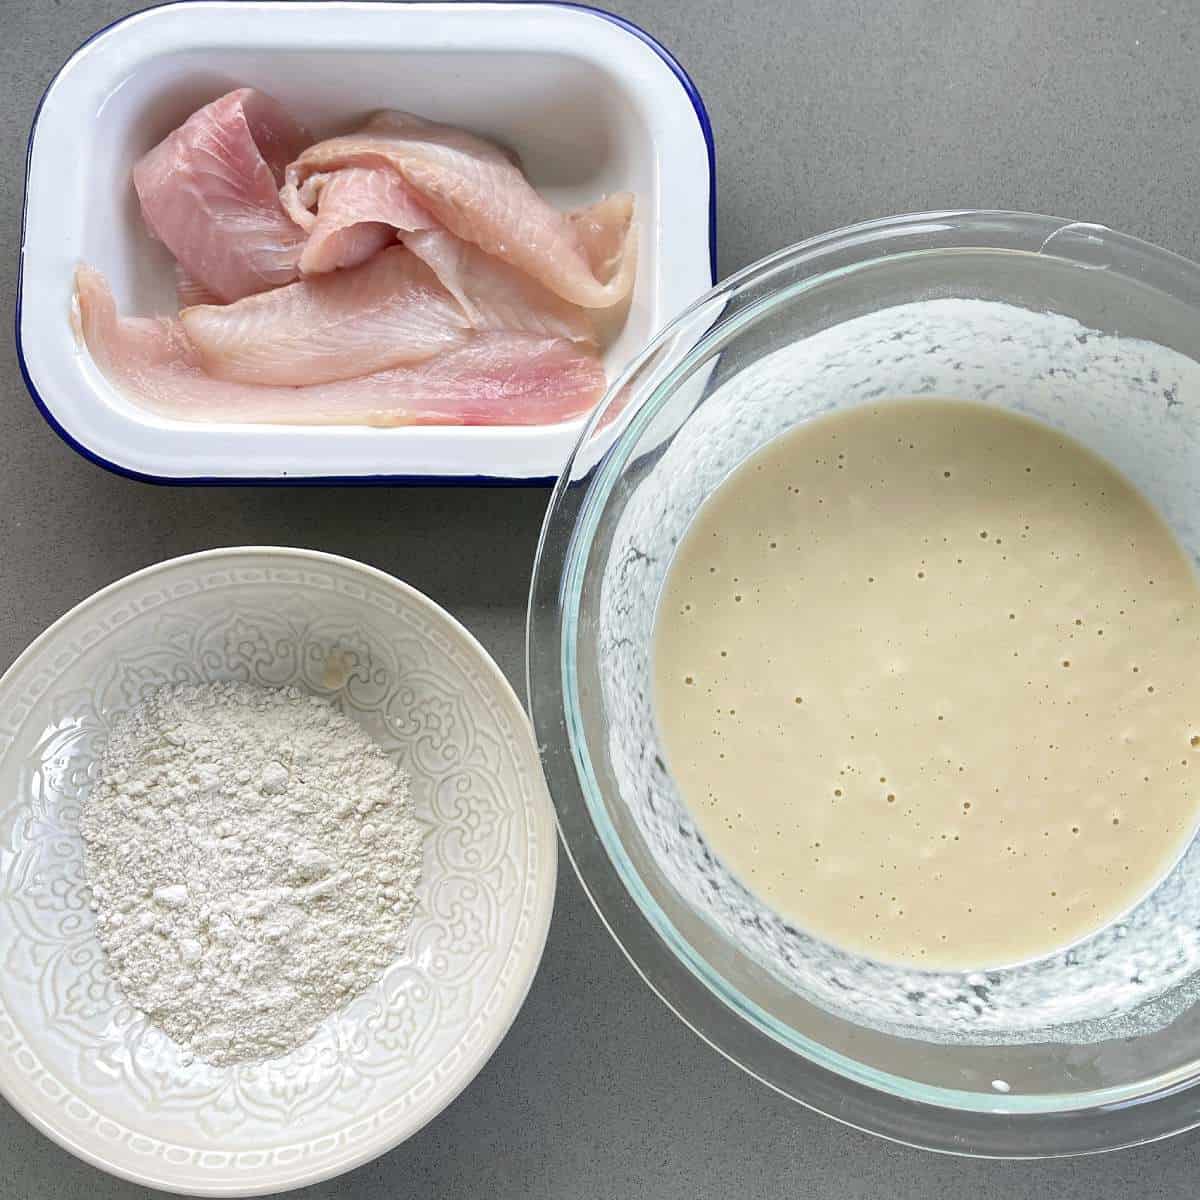 A birds eye view of flour, batter and fish demonstrating the process of how to batter the fish for the battered fish burgers.